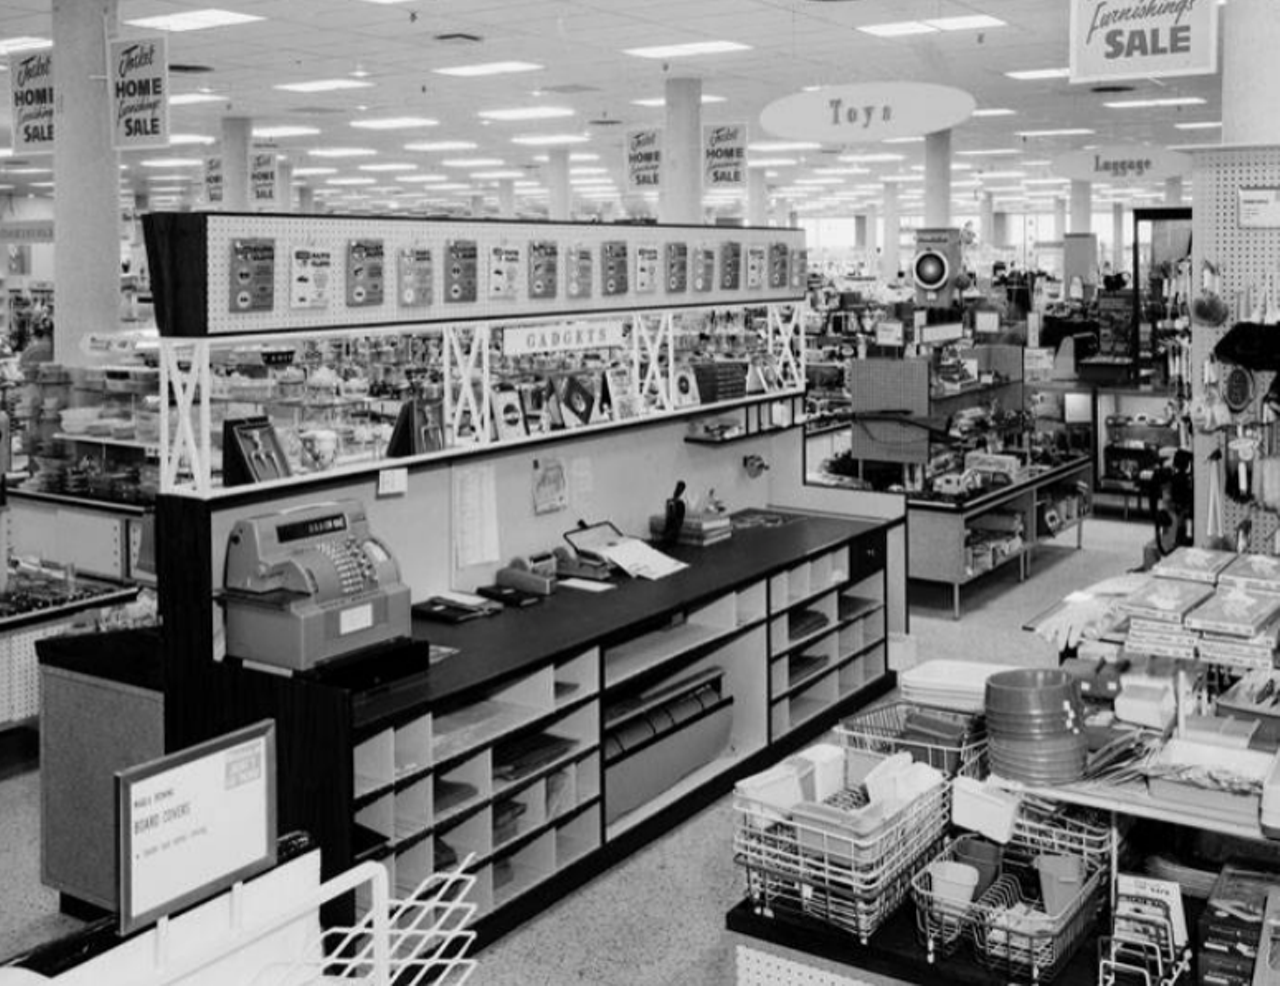 This is what "gadgets" in the home furnishings section looked like in 1957.